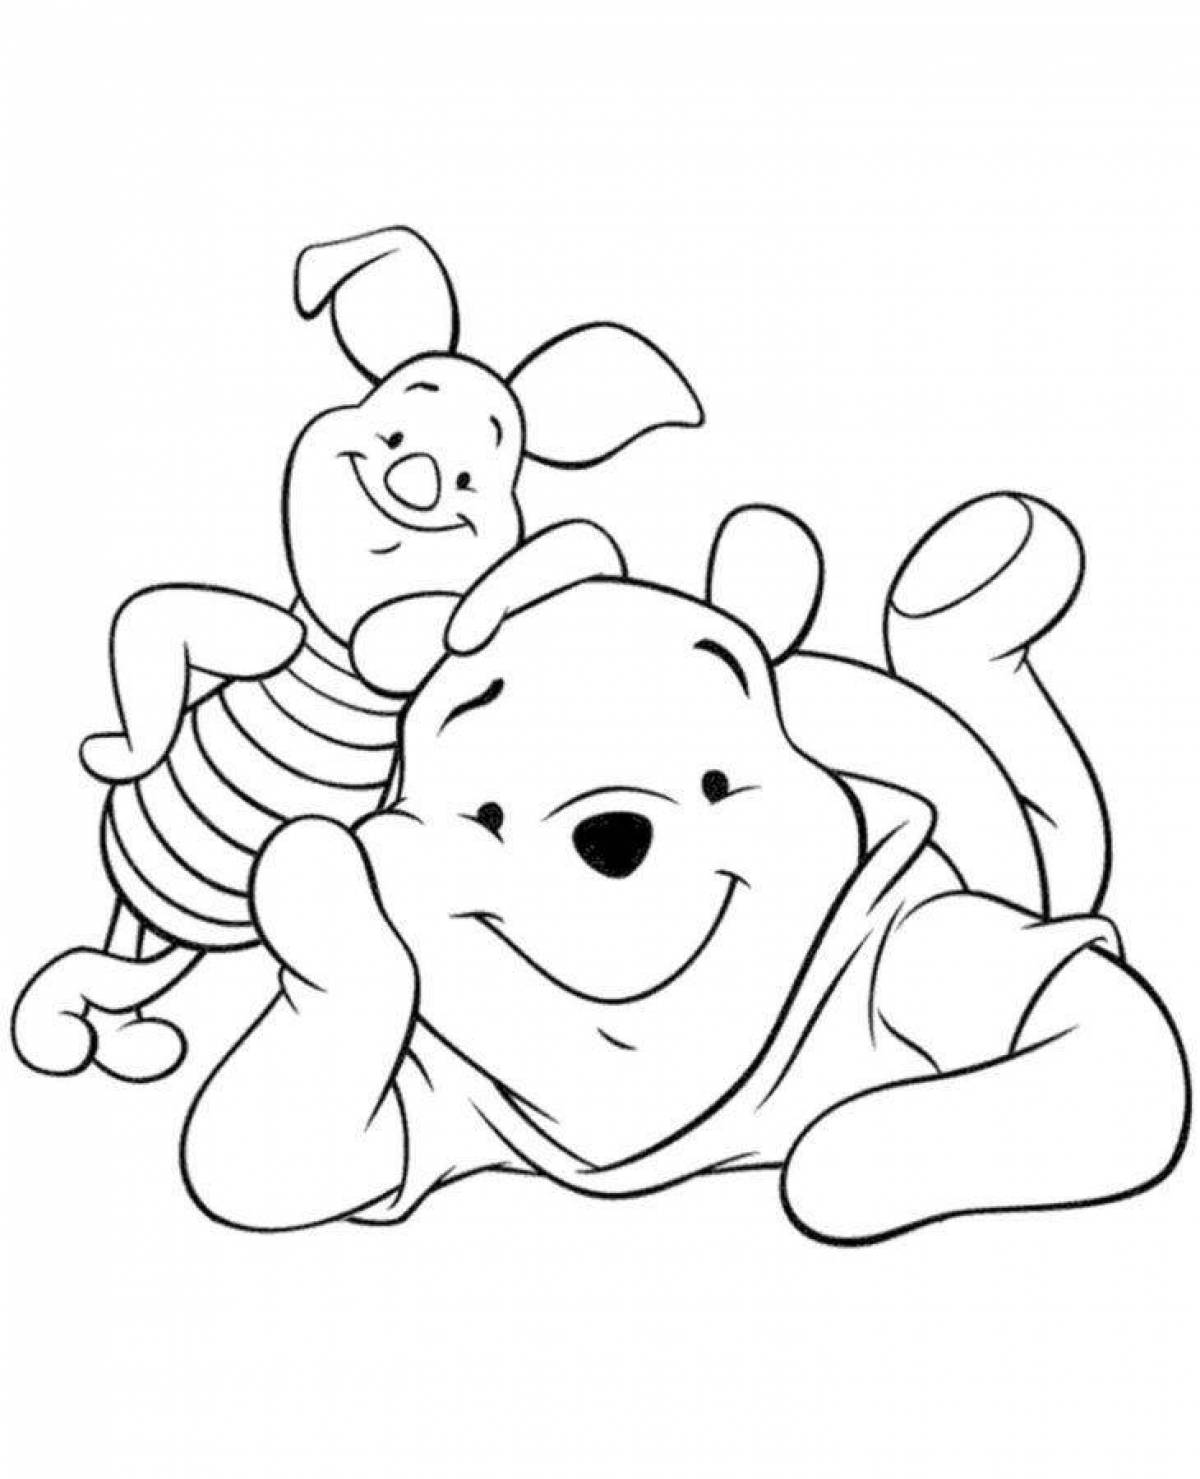 Rampant Winnie the Pooh and Piglet coloring book